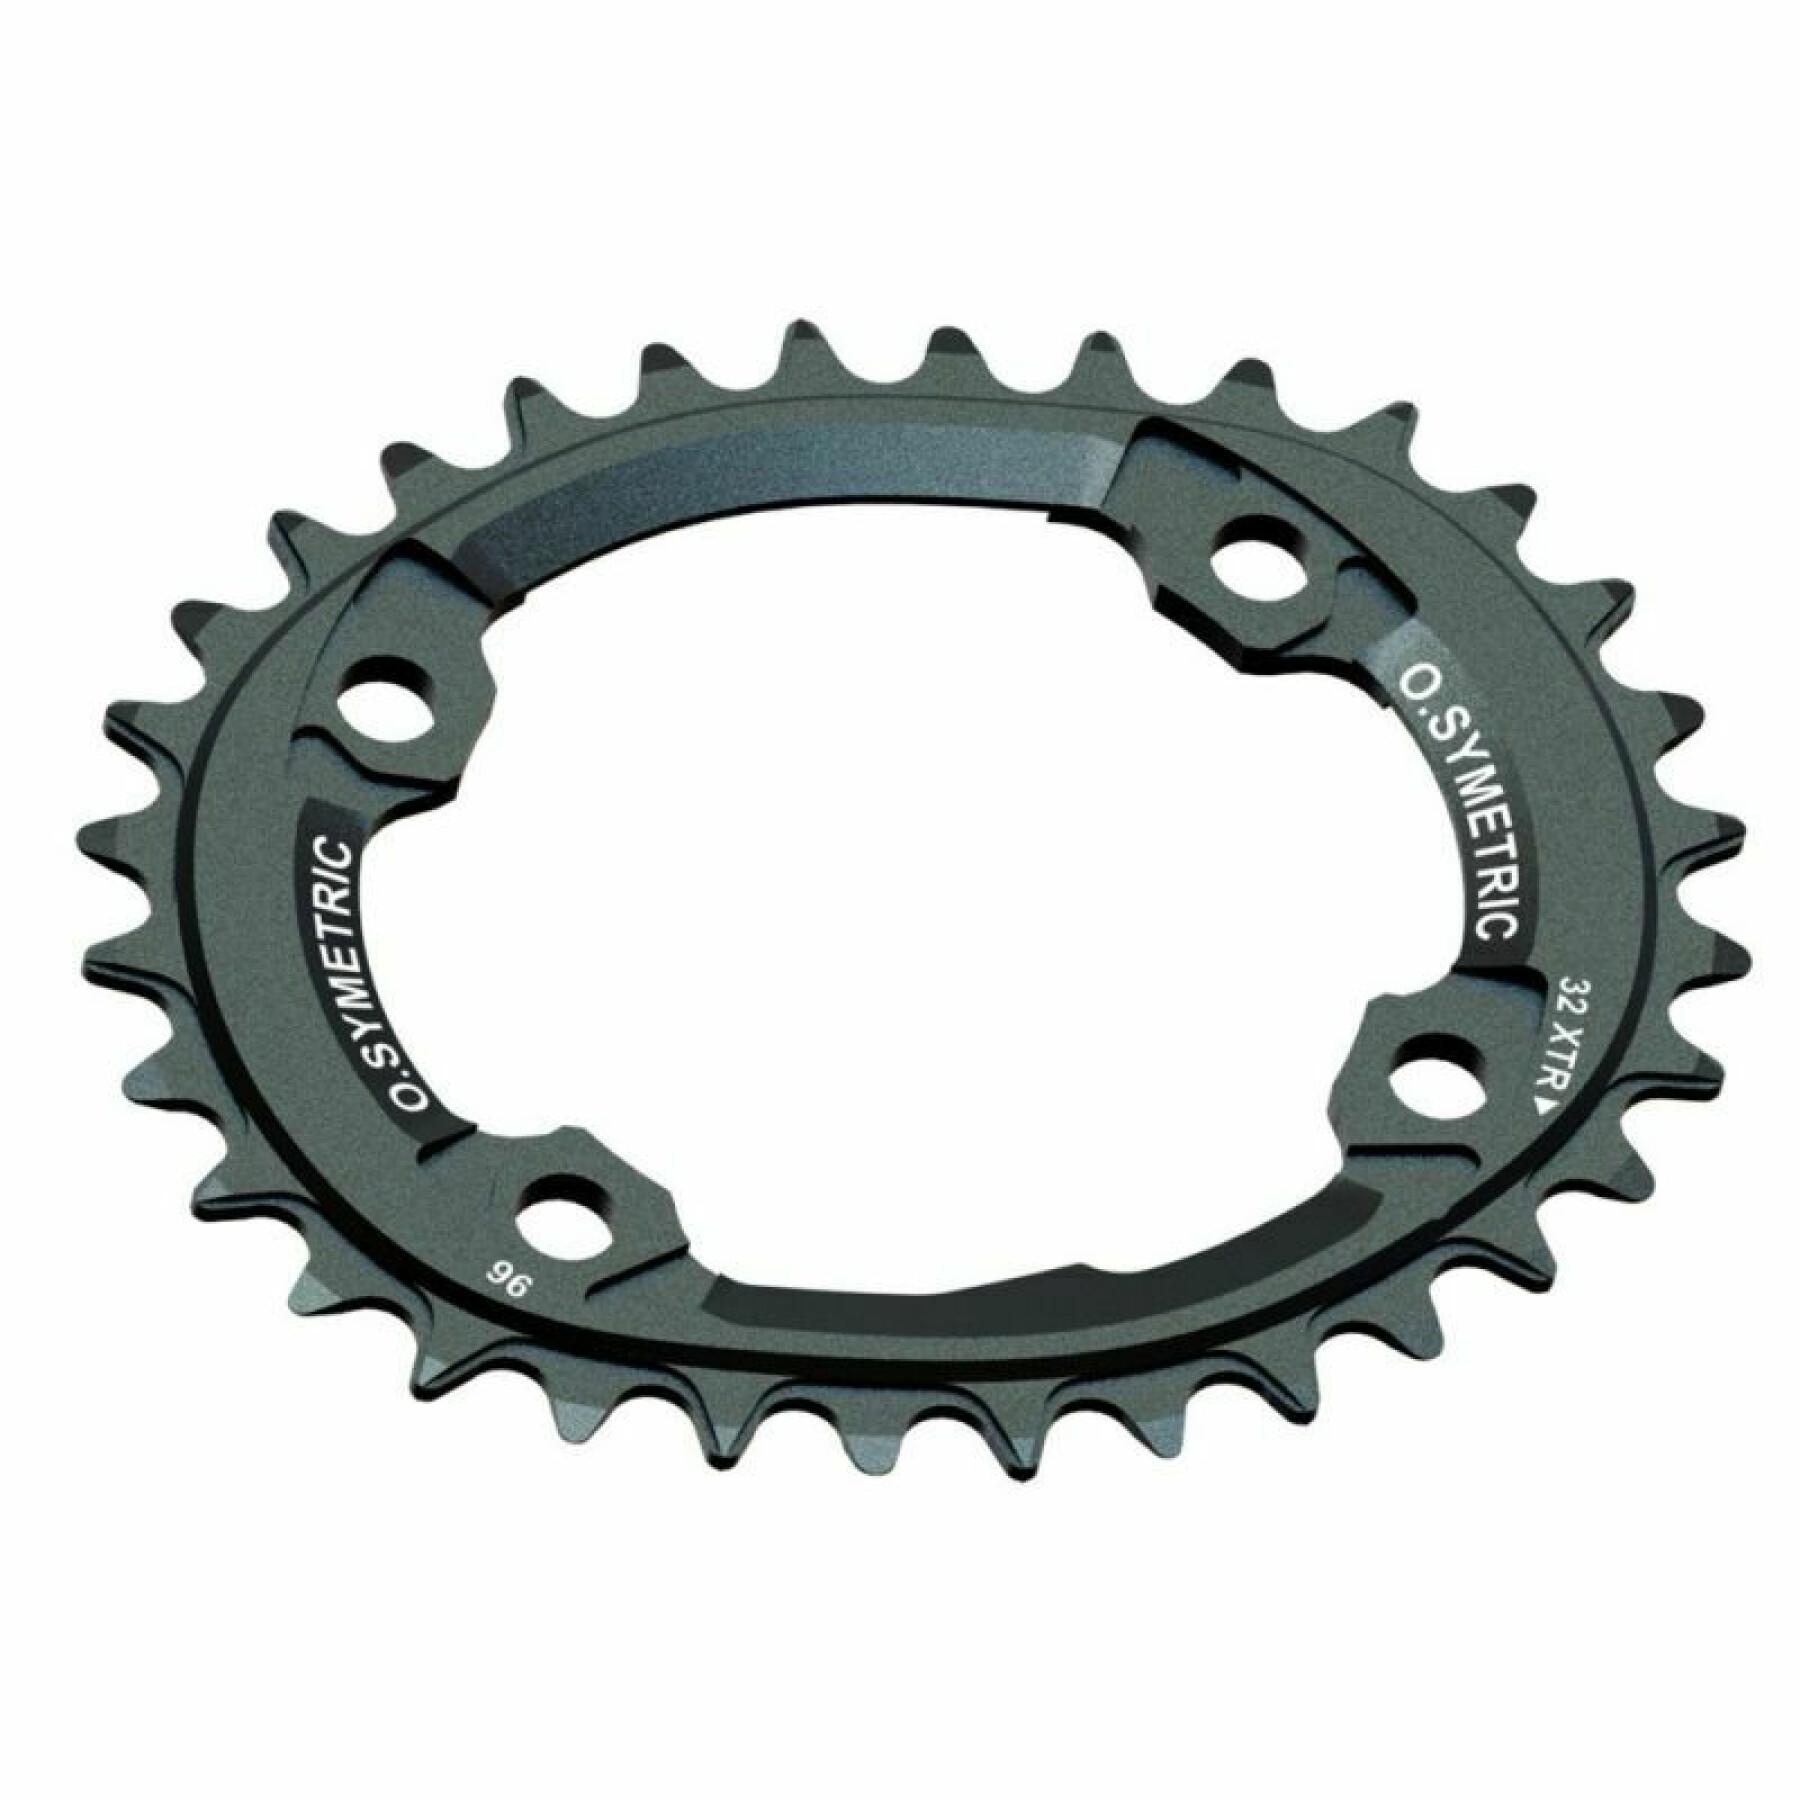 Plateaux osymetric Stronglight 96 BCD Shimano XTR 32T